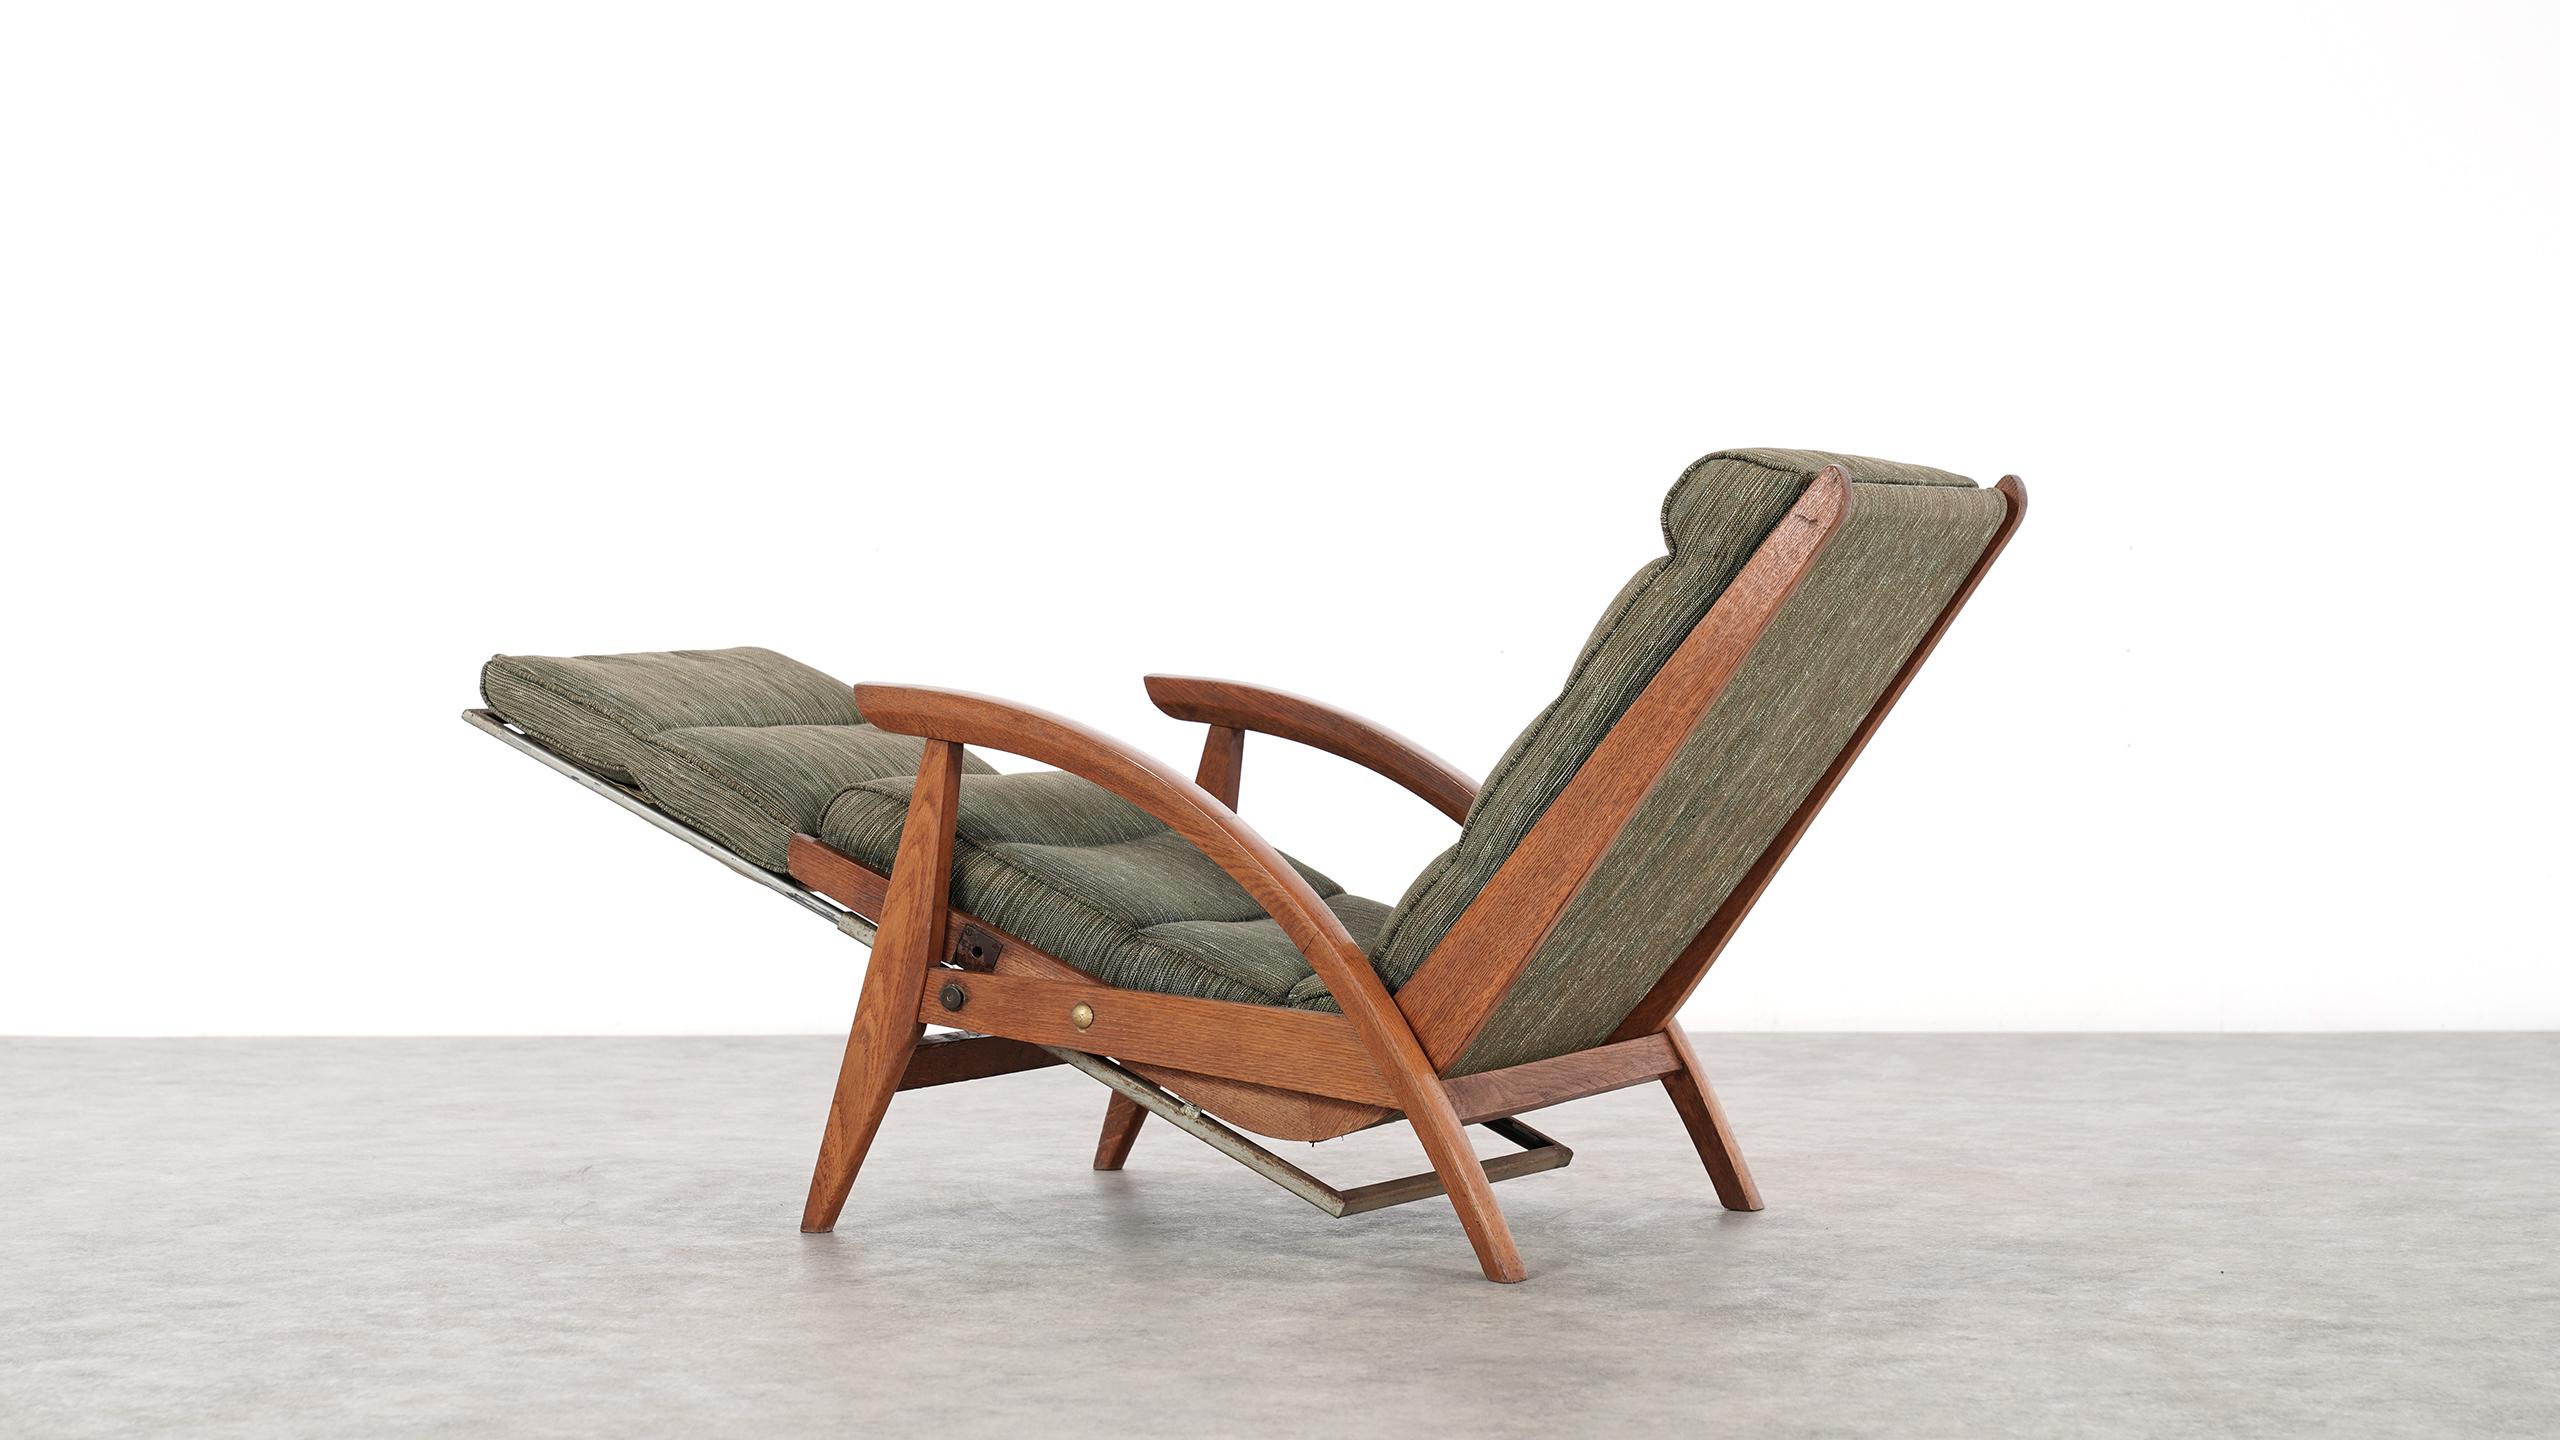 Guy Besnard FS 134 Reclining Lounge Chair, 1954 for Free Span, France Prouvé 9